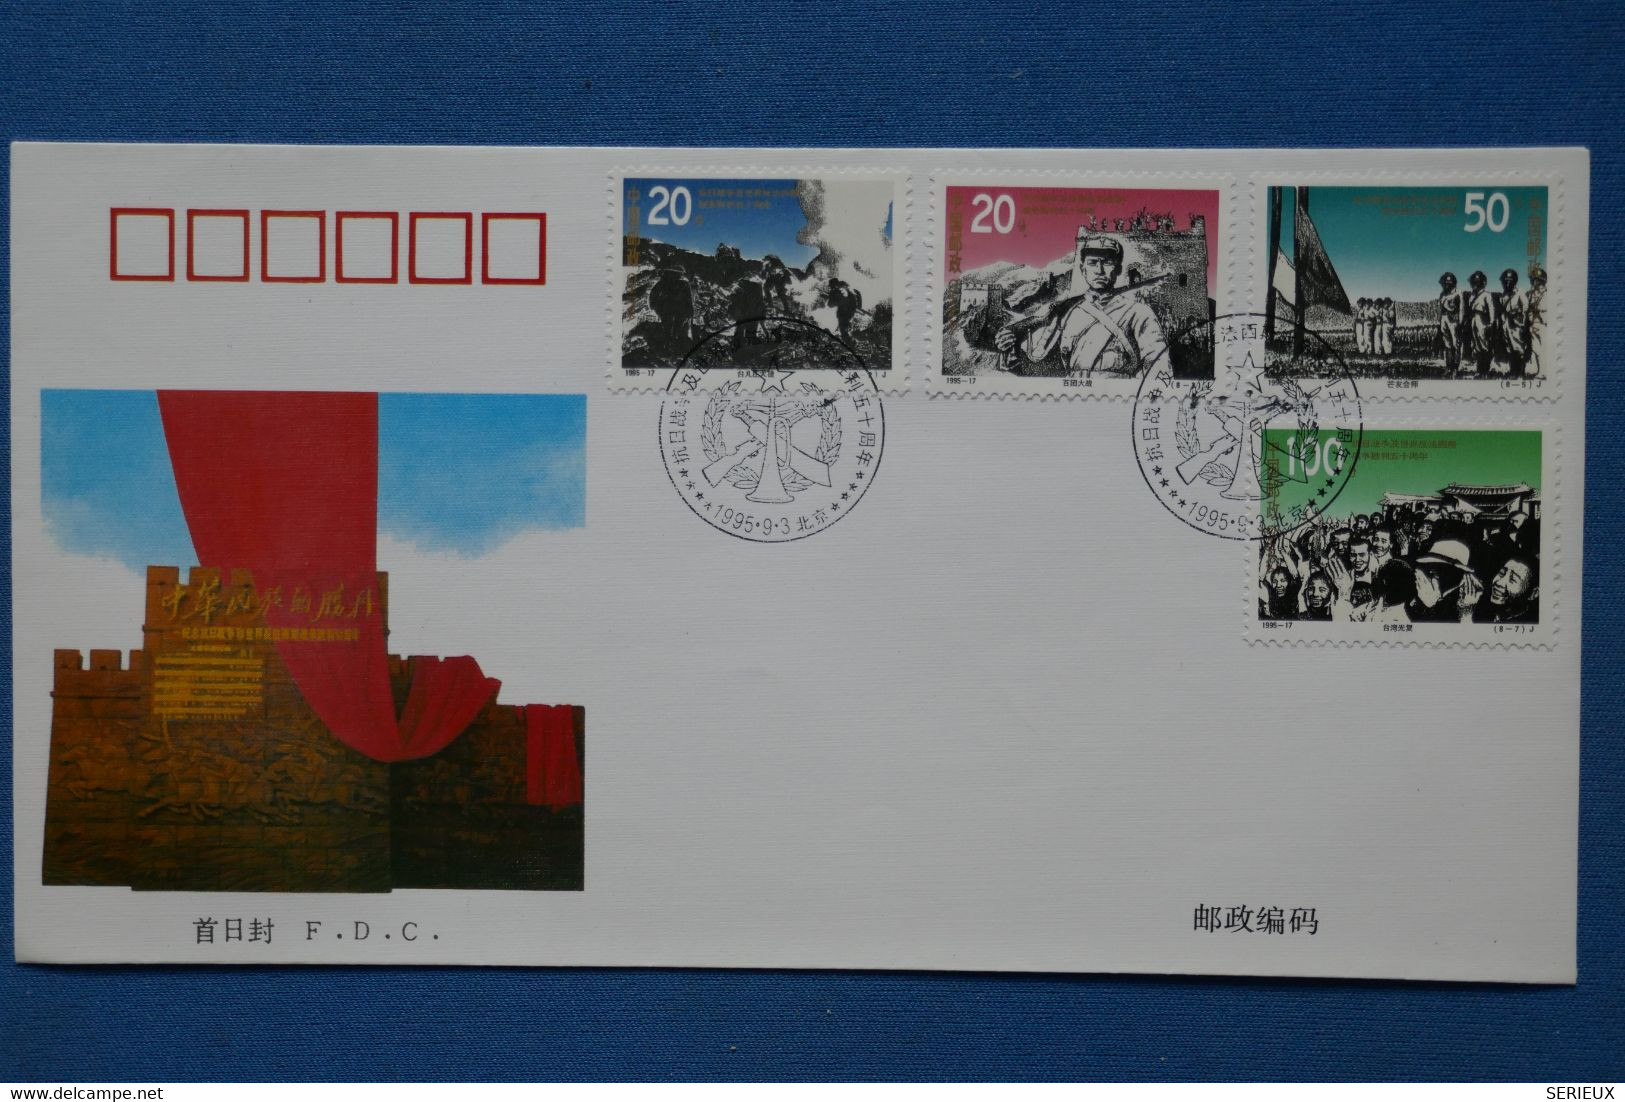 #7 CHINA BELLE LETTRE  FDC 1995  NON VOYAGEE. NEUVE+ + - Covers & Documents